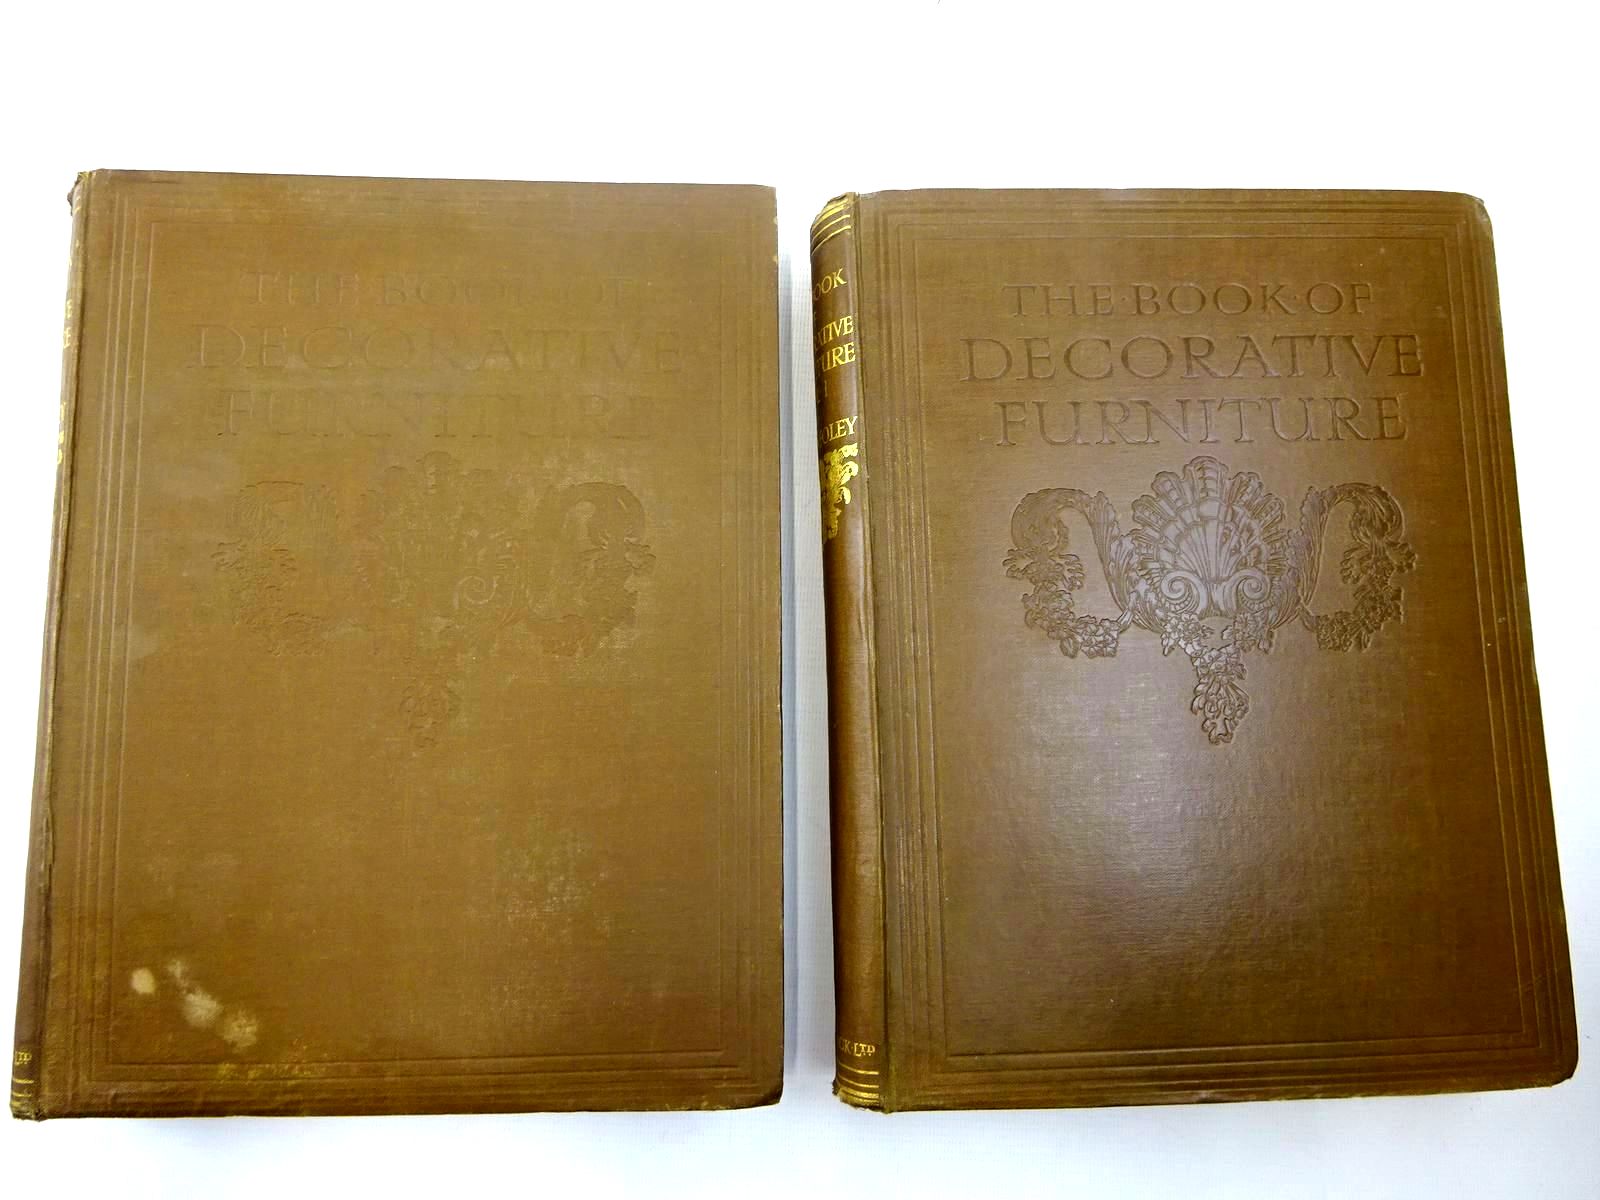 Photo of THE BOOK OF DECORATIVE FURNITURE ITS FORM, COLOUR, & HISTORY (2 VOLUMES) written by Foley, Edwin illustrated by Foley, Edwin
et al., published by T.C. & E.C. Jack Ltd. (STOCK CODE: 2126391)  for sale by Stella & Rose's Books